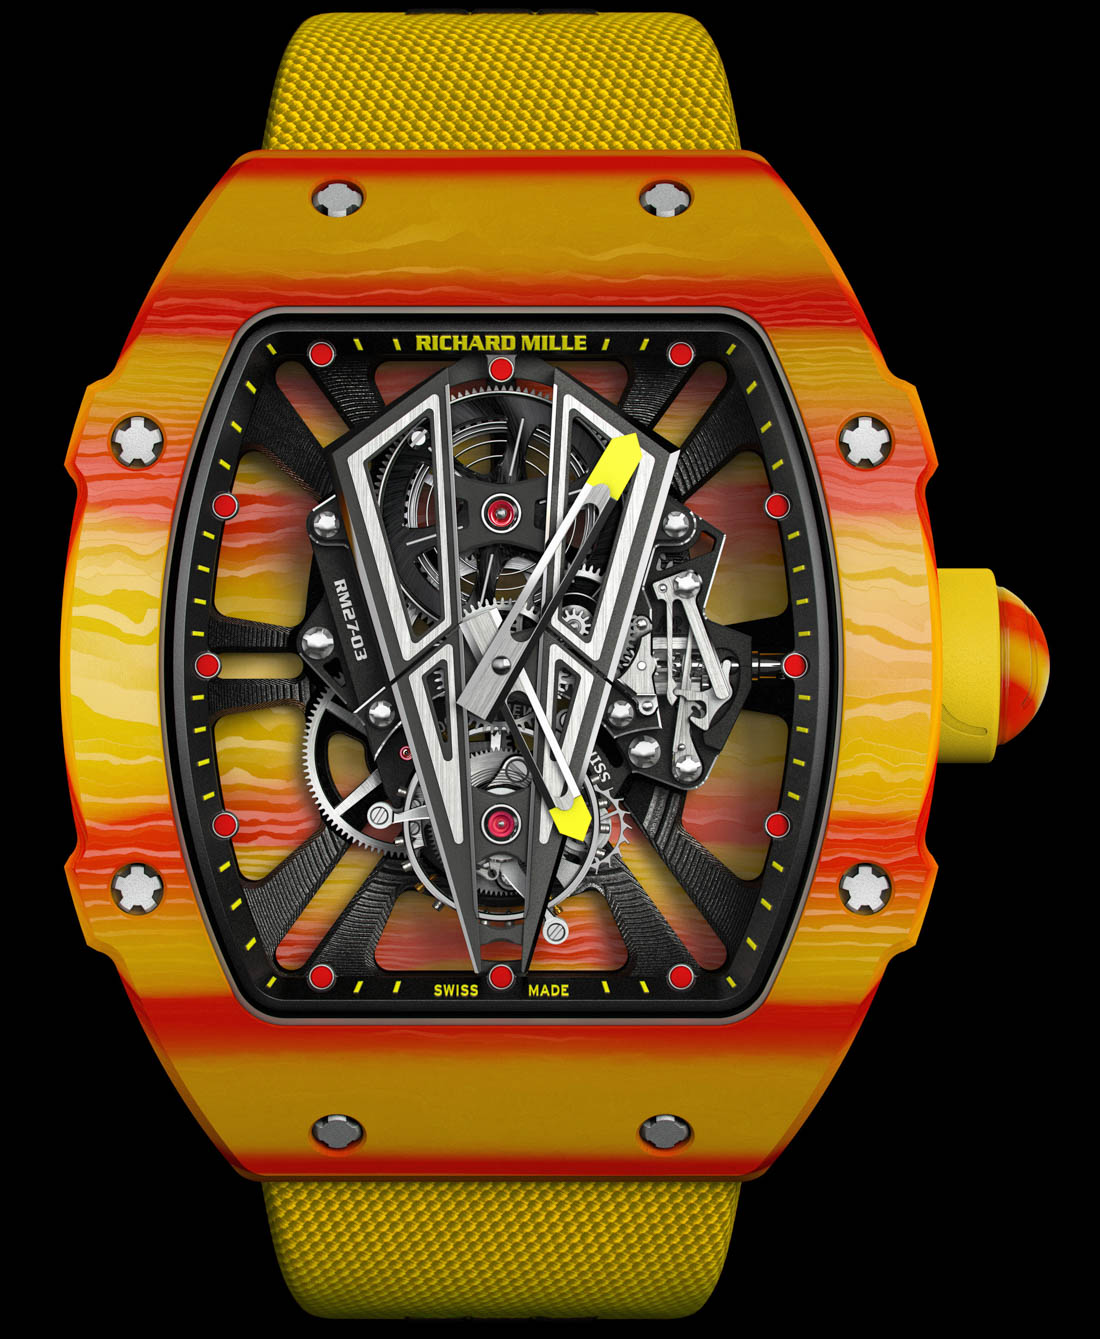 Richard Mille RM 27-03 Rafael Nadal Watch With A Tourbillon To Withstand 10,000 G's | Page 2 of 